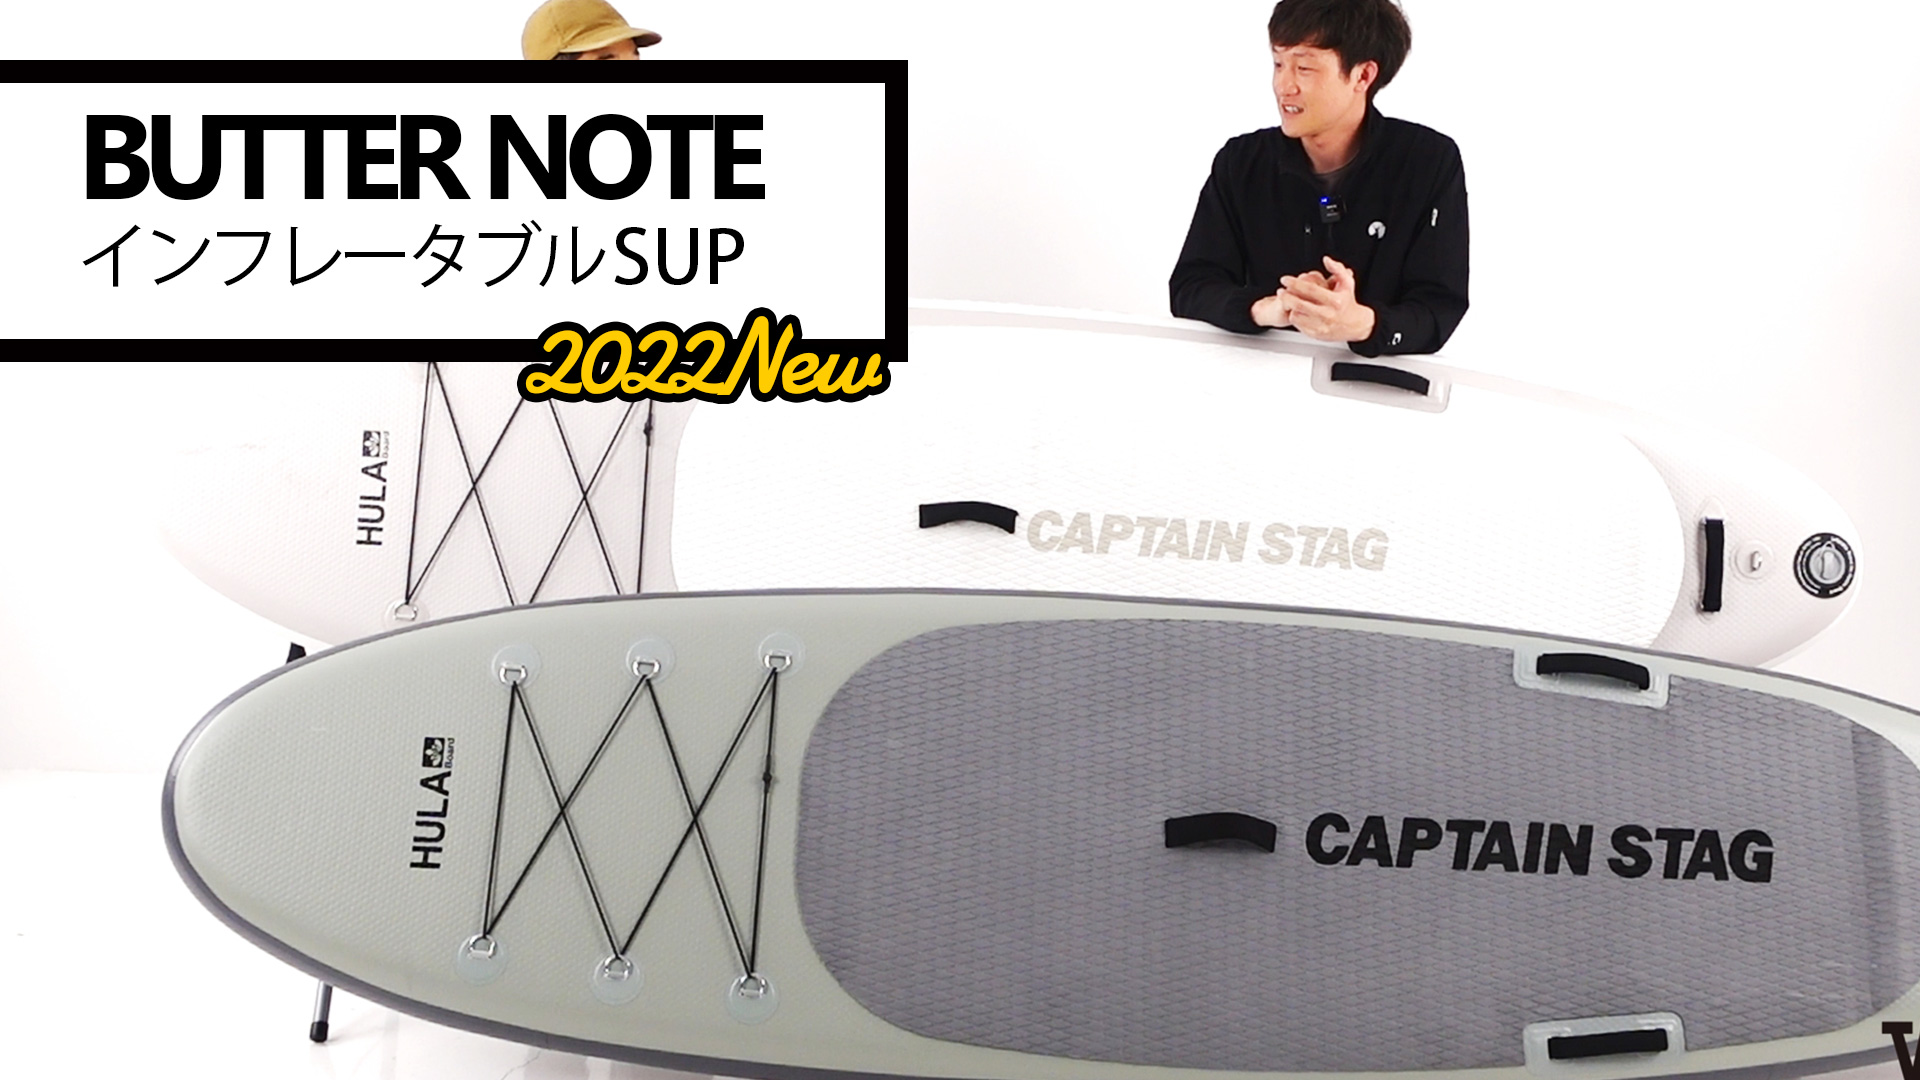 【SUP徹底解説】2022年モデルのSUP「BUTTER NOTE」【コスパ抜群】